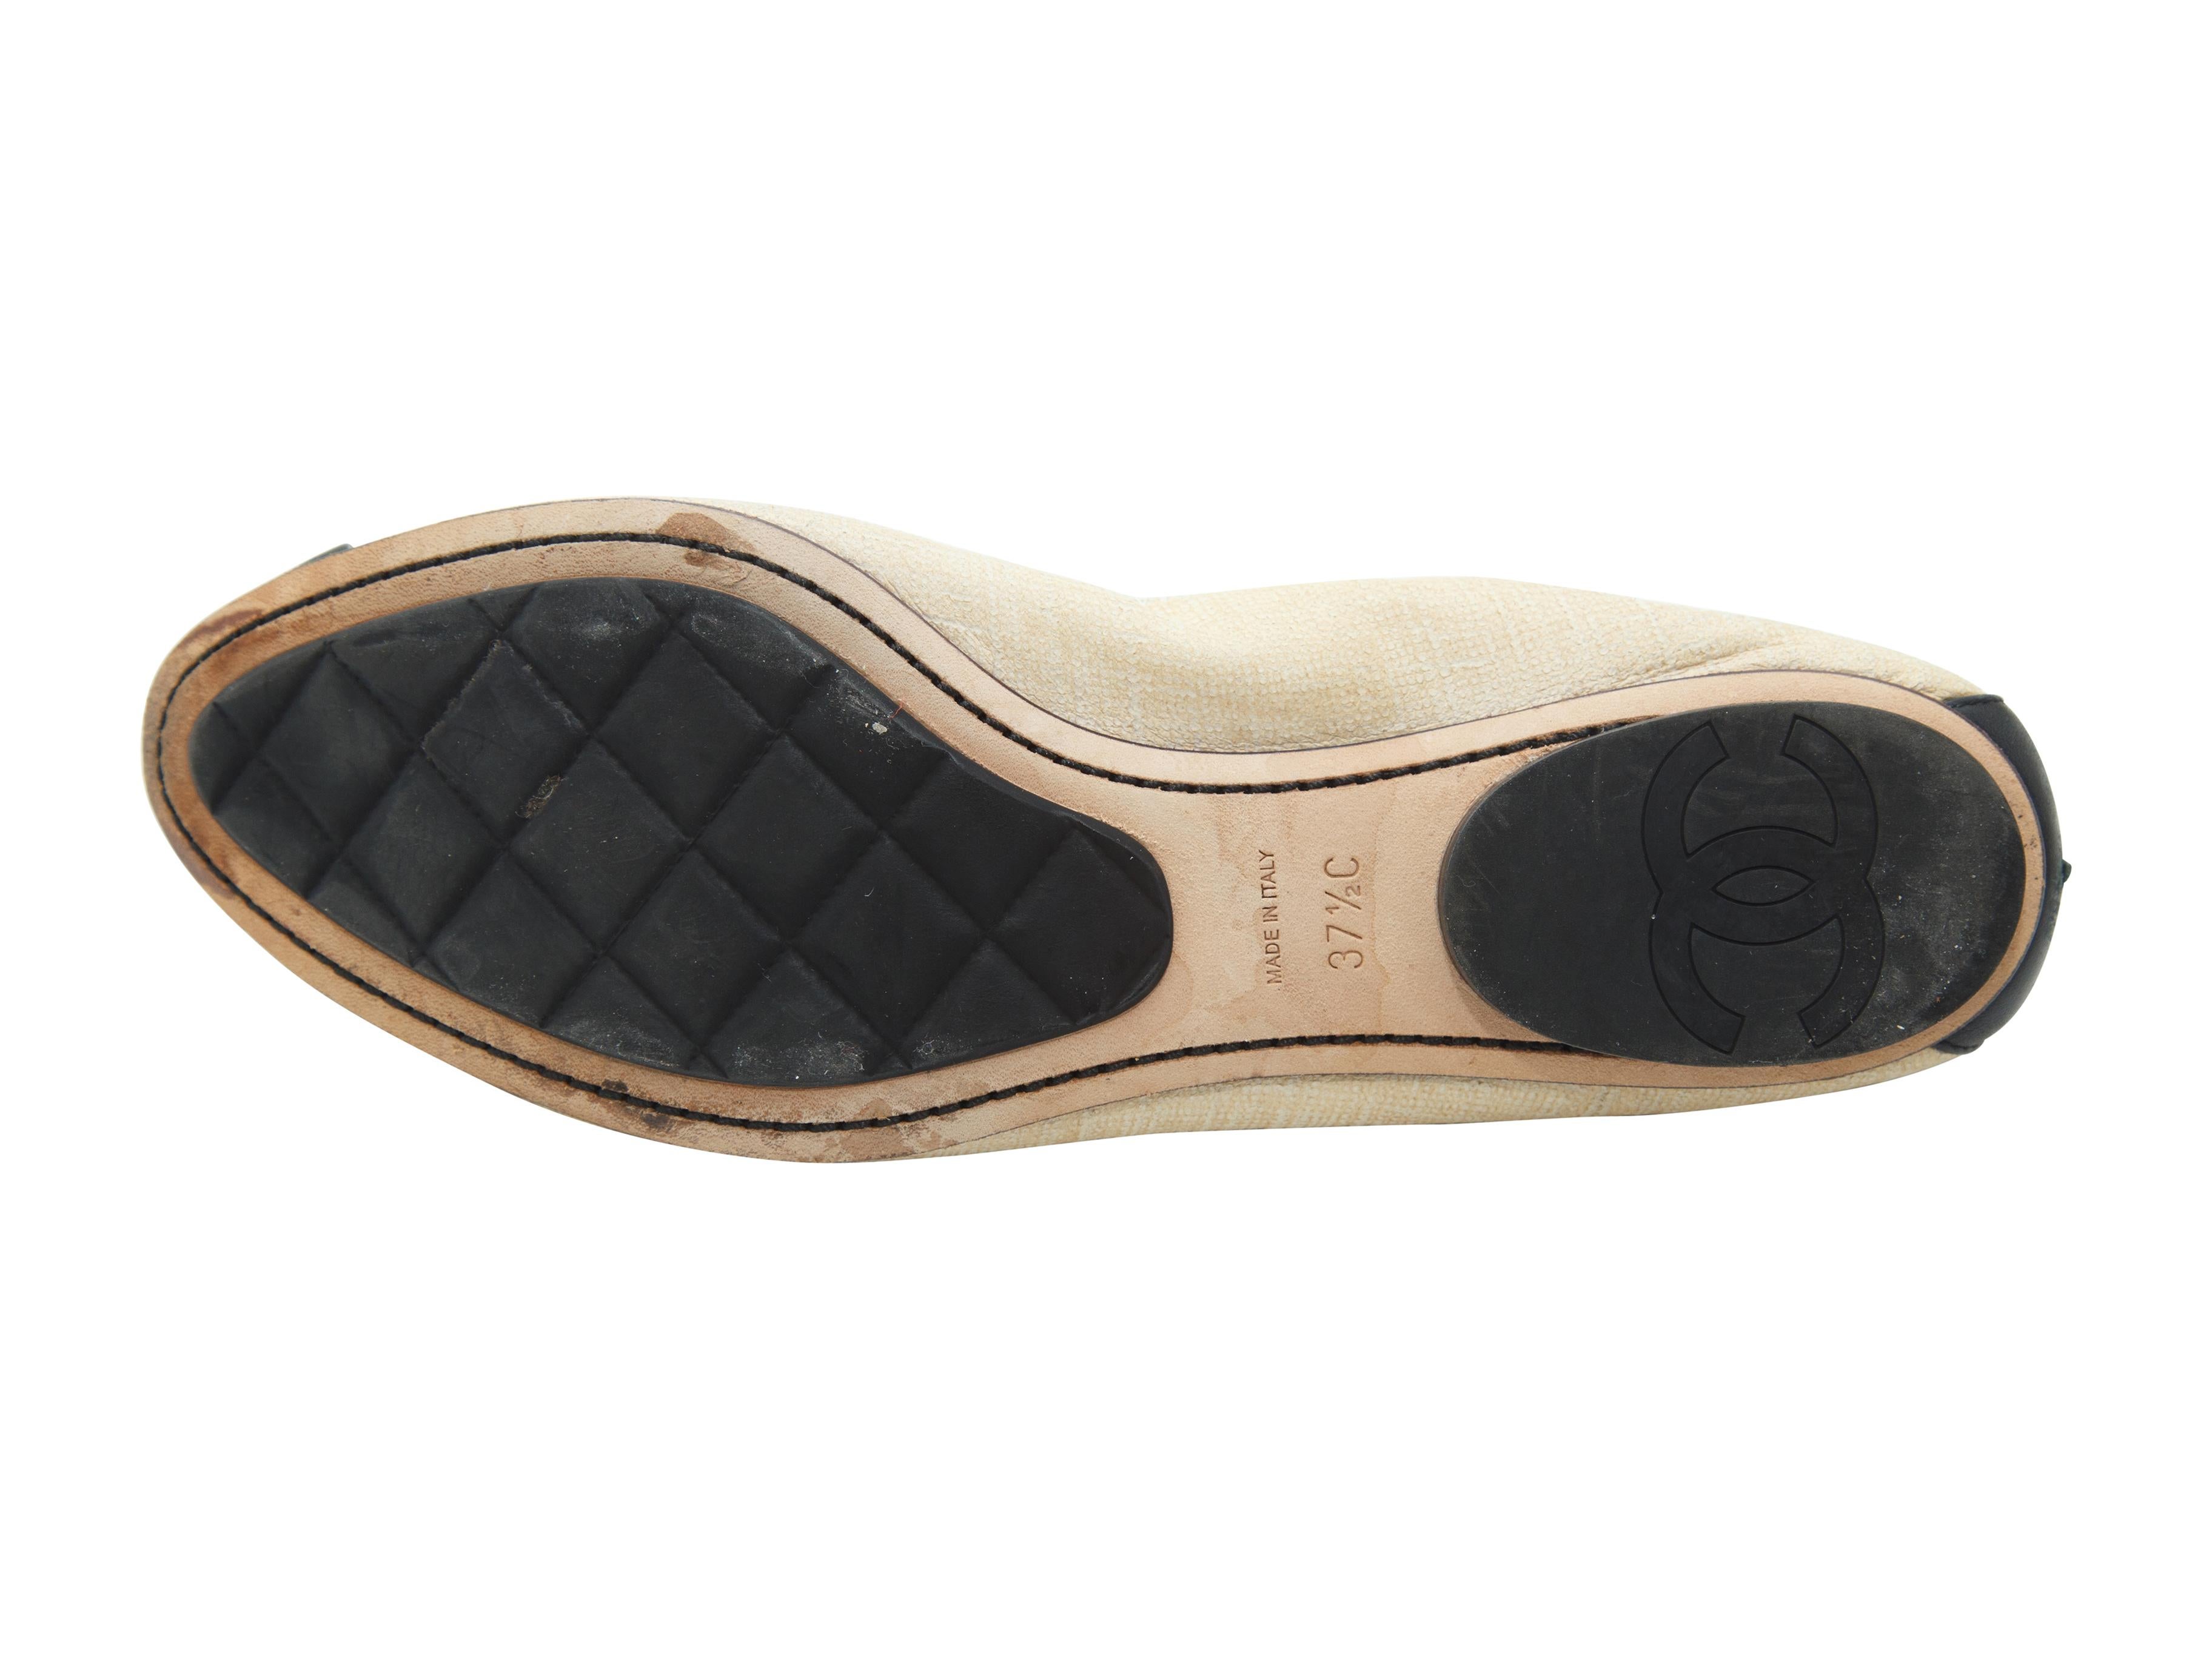 Chanel Tweed Ballet Flat - 5 For Sale on 1stDibs